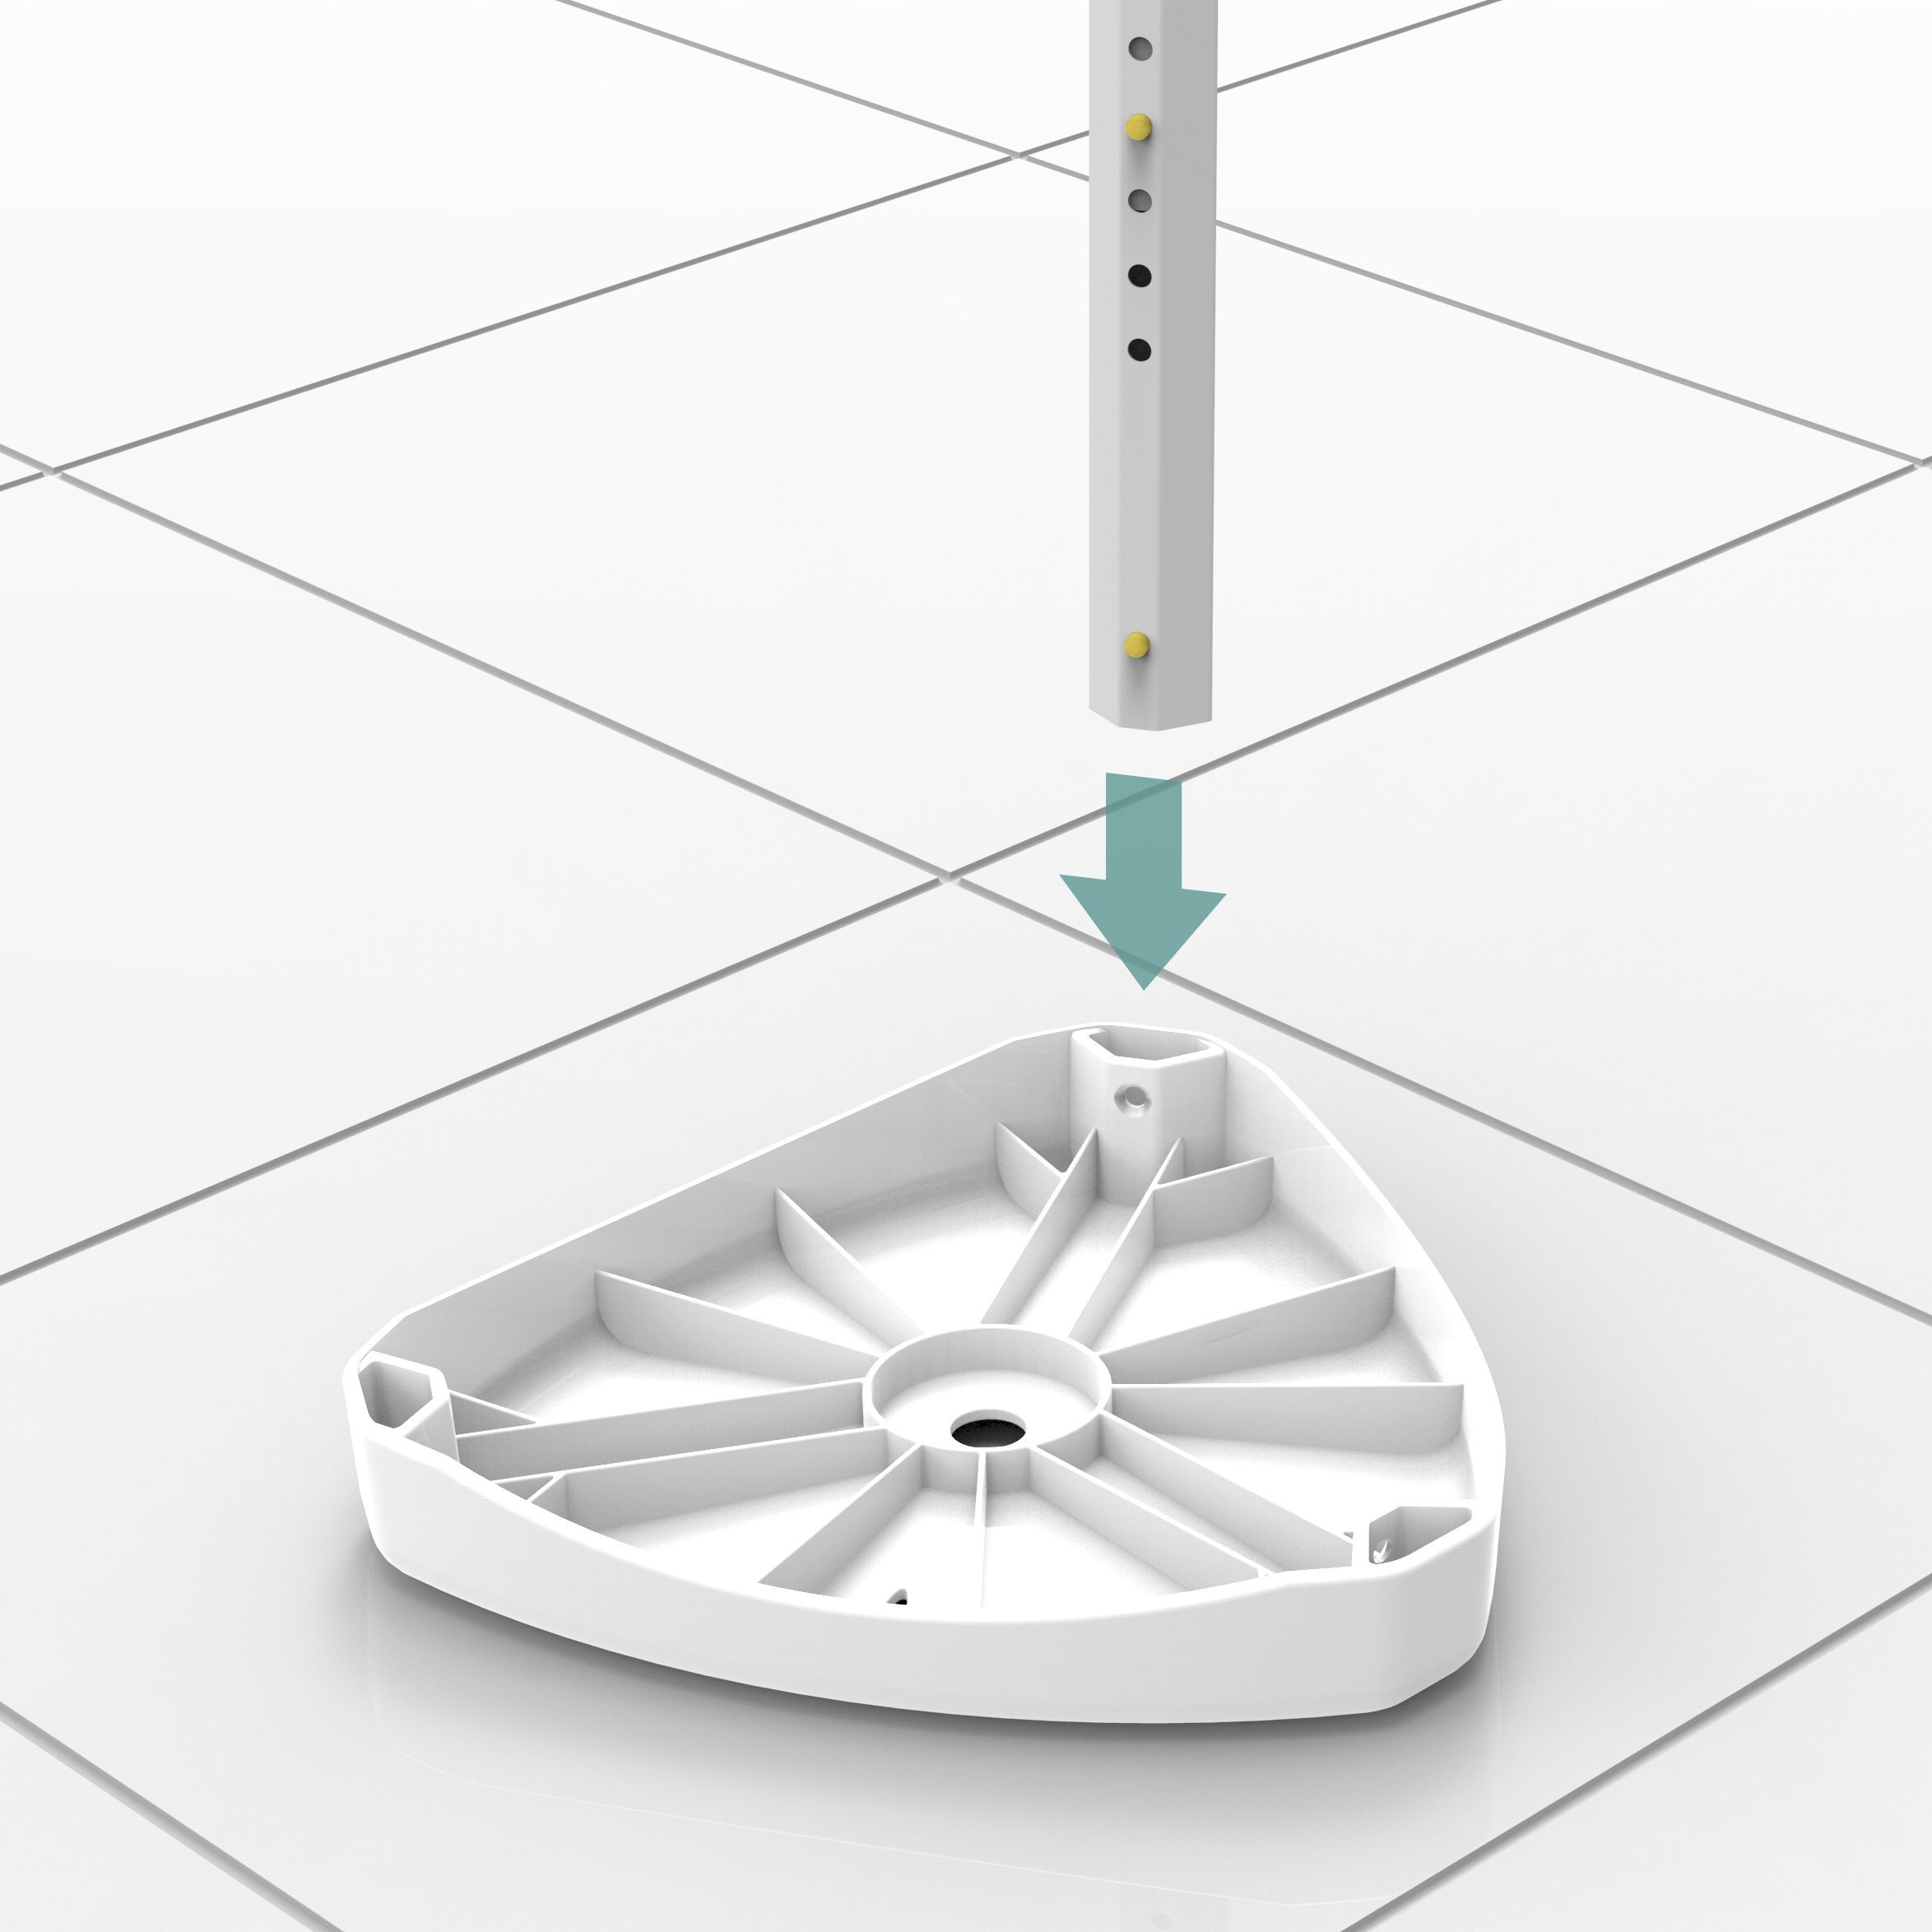 Illustration of how to install the shower stool legs